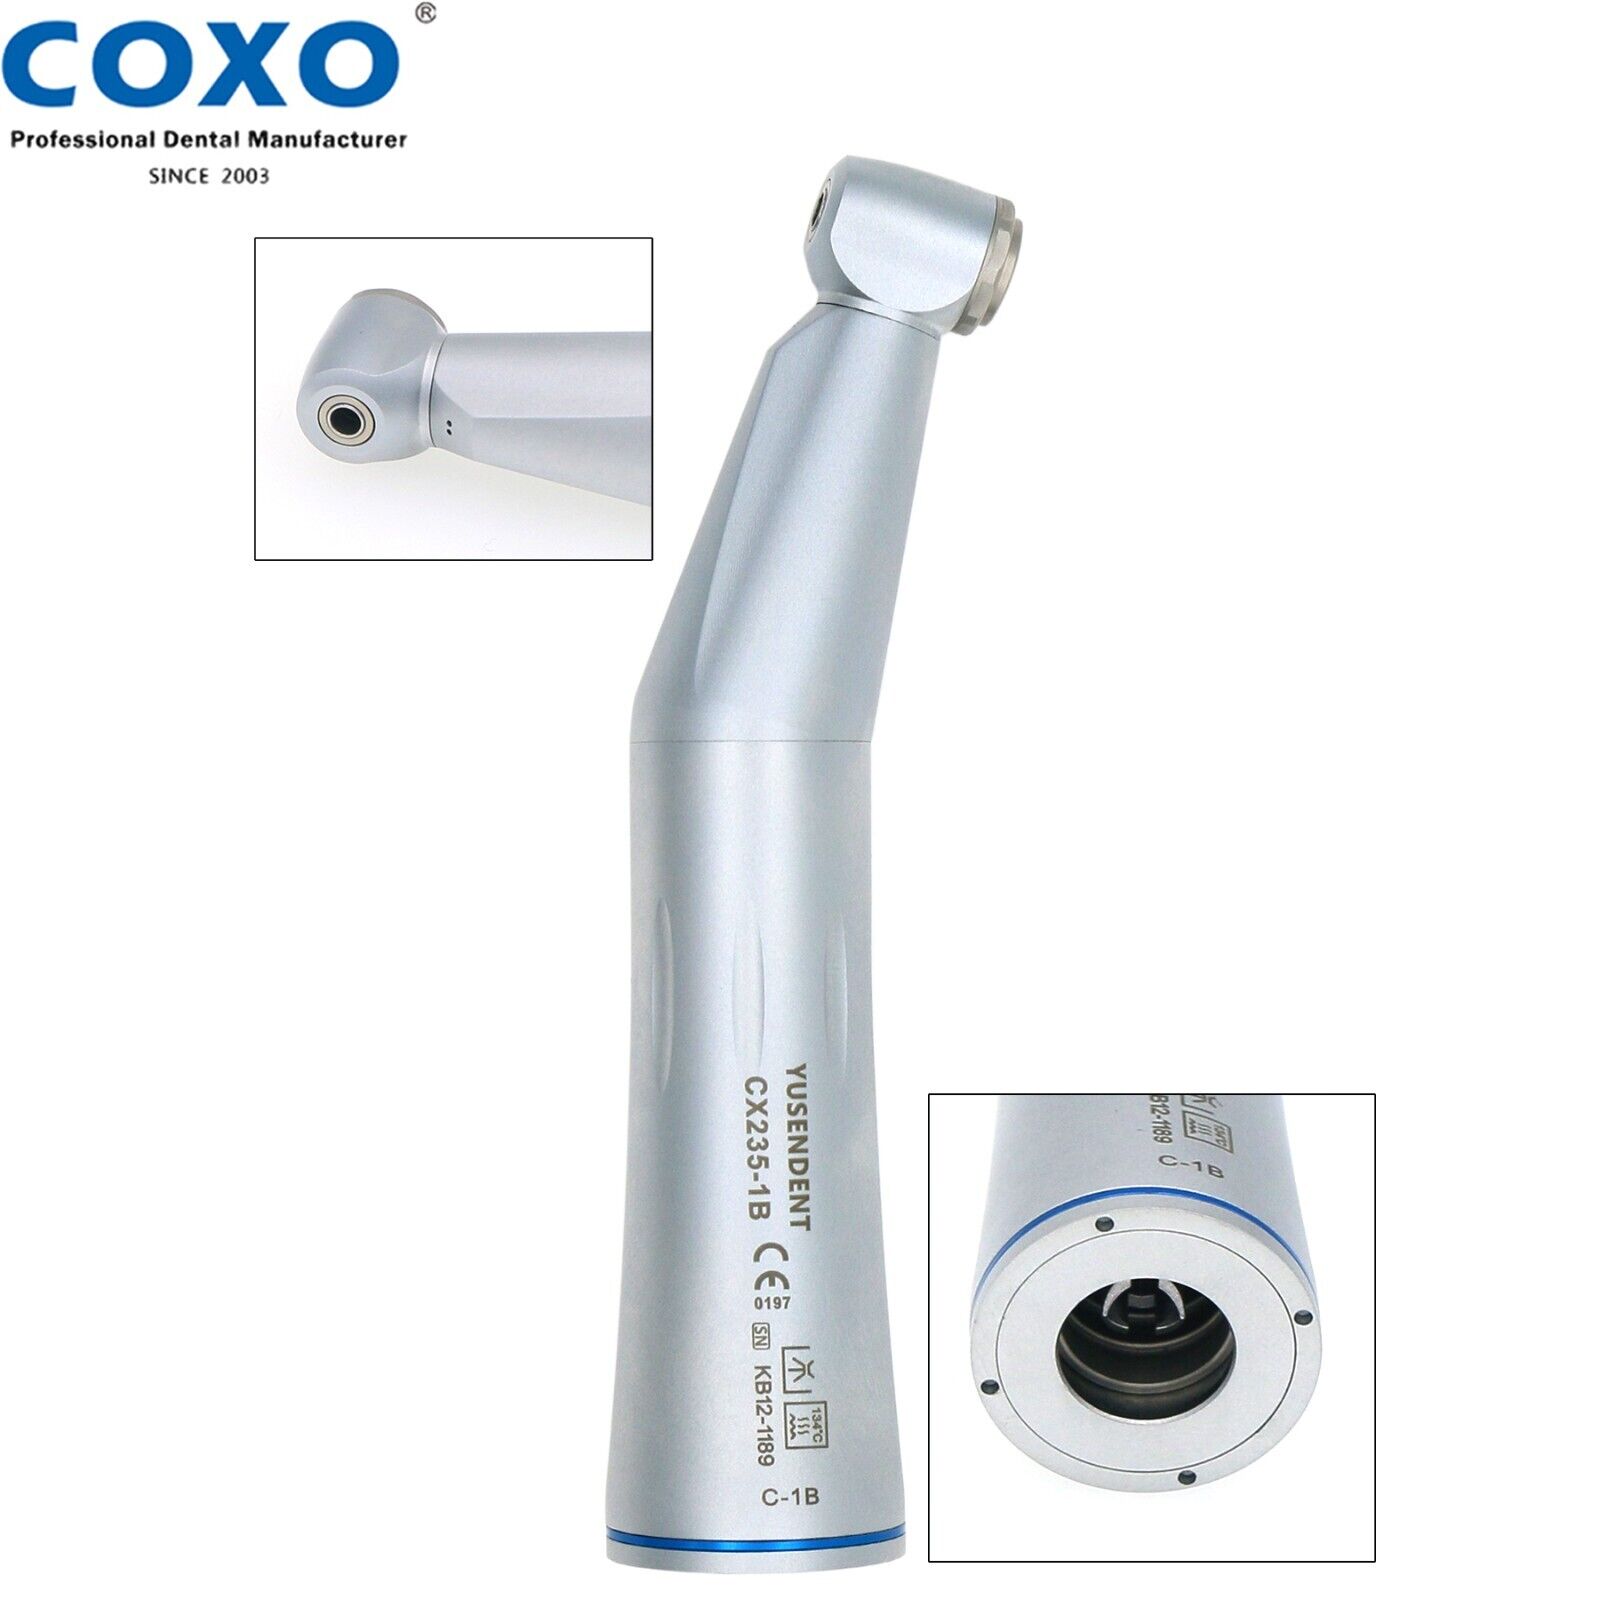 US COXO Dental Low Speed Contra Angle 1:1 Handpiece Inner Water Air Motor E Type